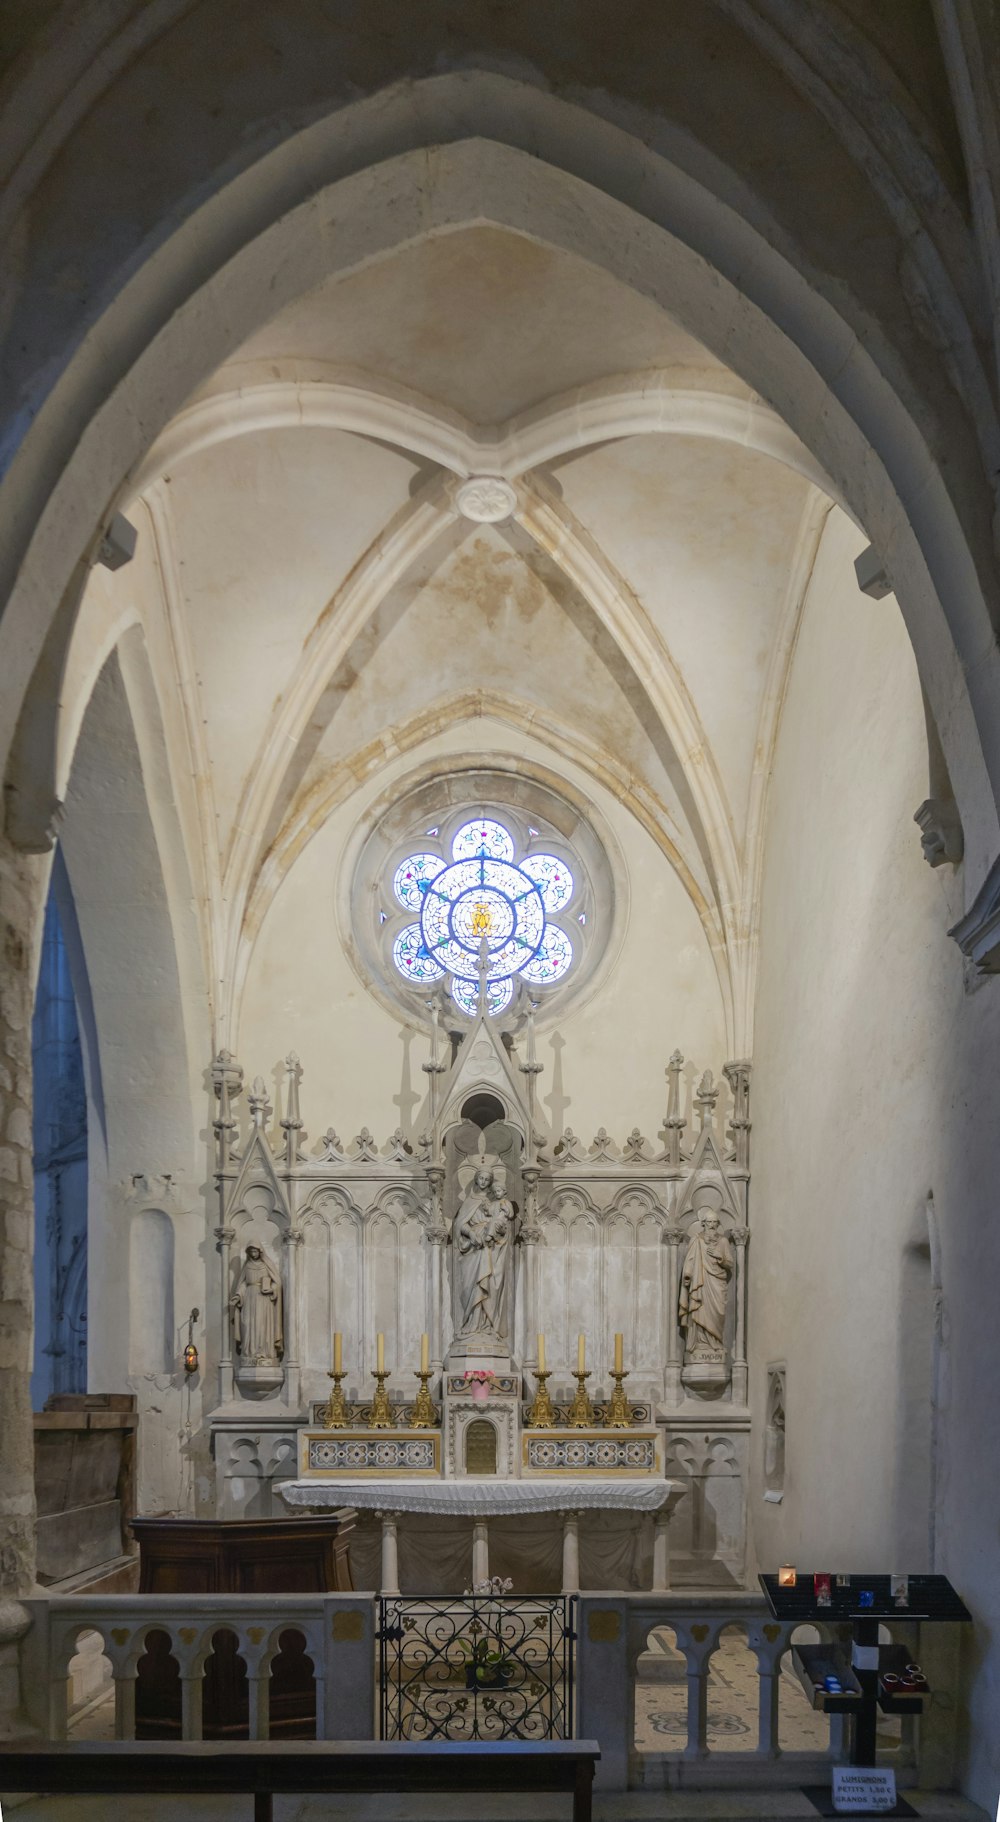 the interior of a church with a stained glass window